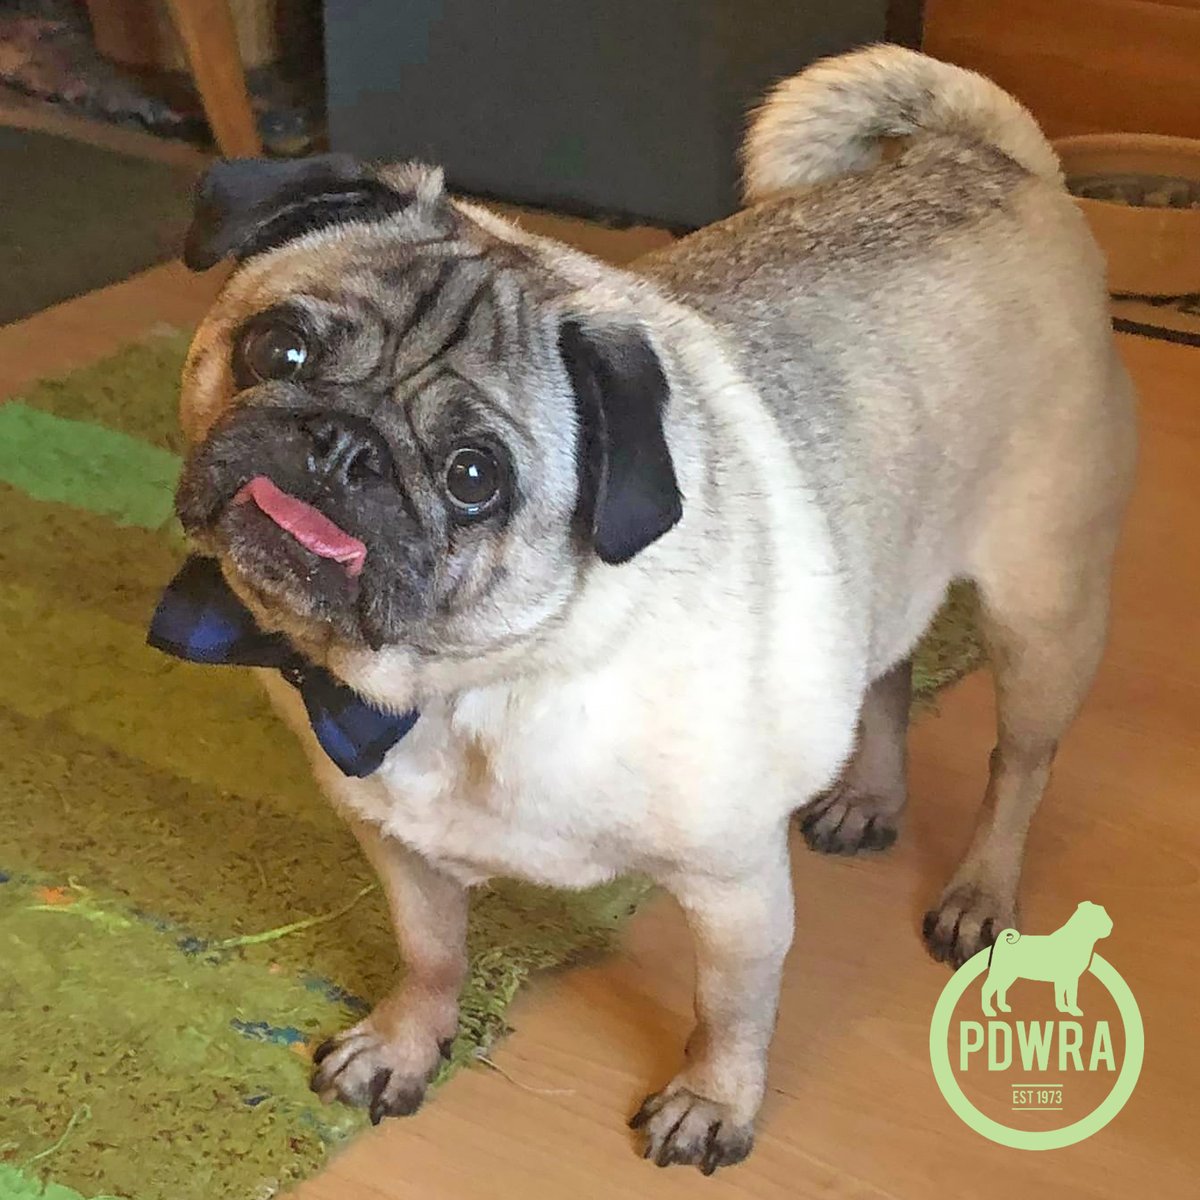 In April’s newsletter, we delved into Laura's experience as a first-time dog owner to find out how Melvin, whom she adopted from the PDWRA a year ago, has become such an integral part of her life - ecs.page.link/VZSxo 
#pdwra #pugcharity #foreverhome #pugadoption #pug